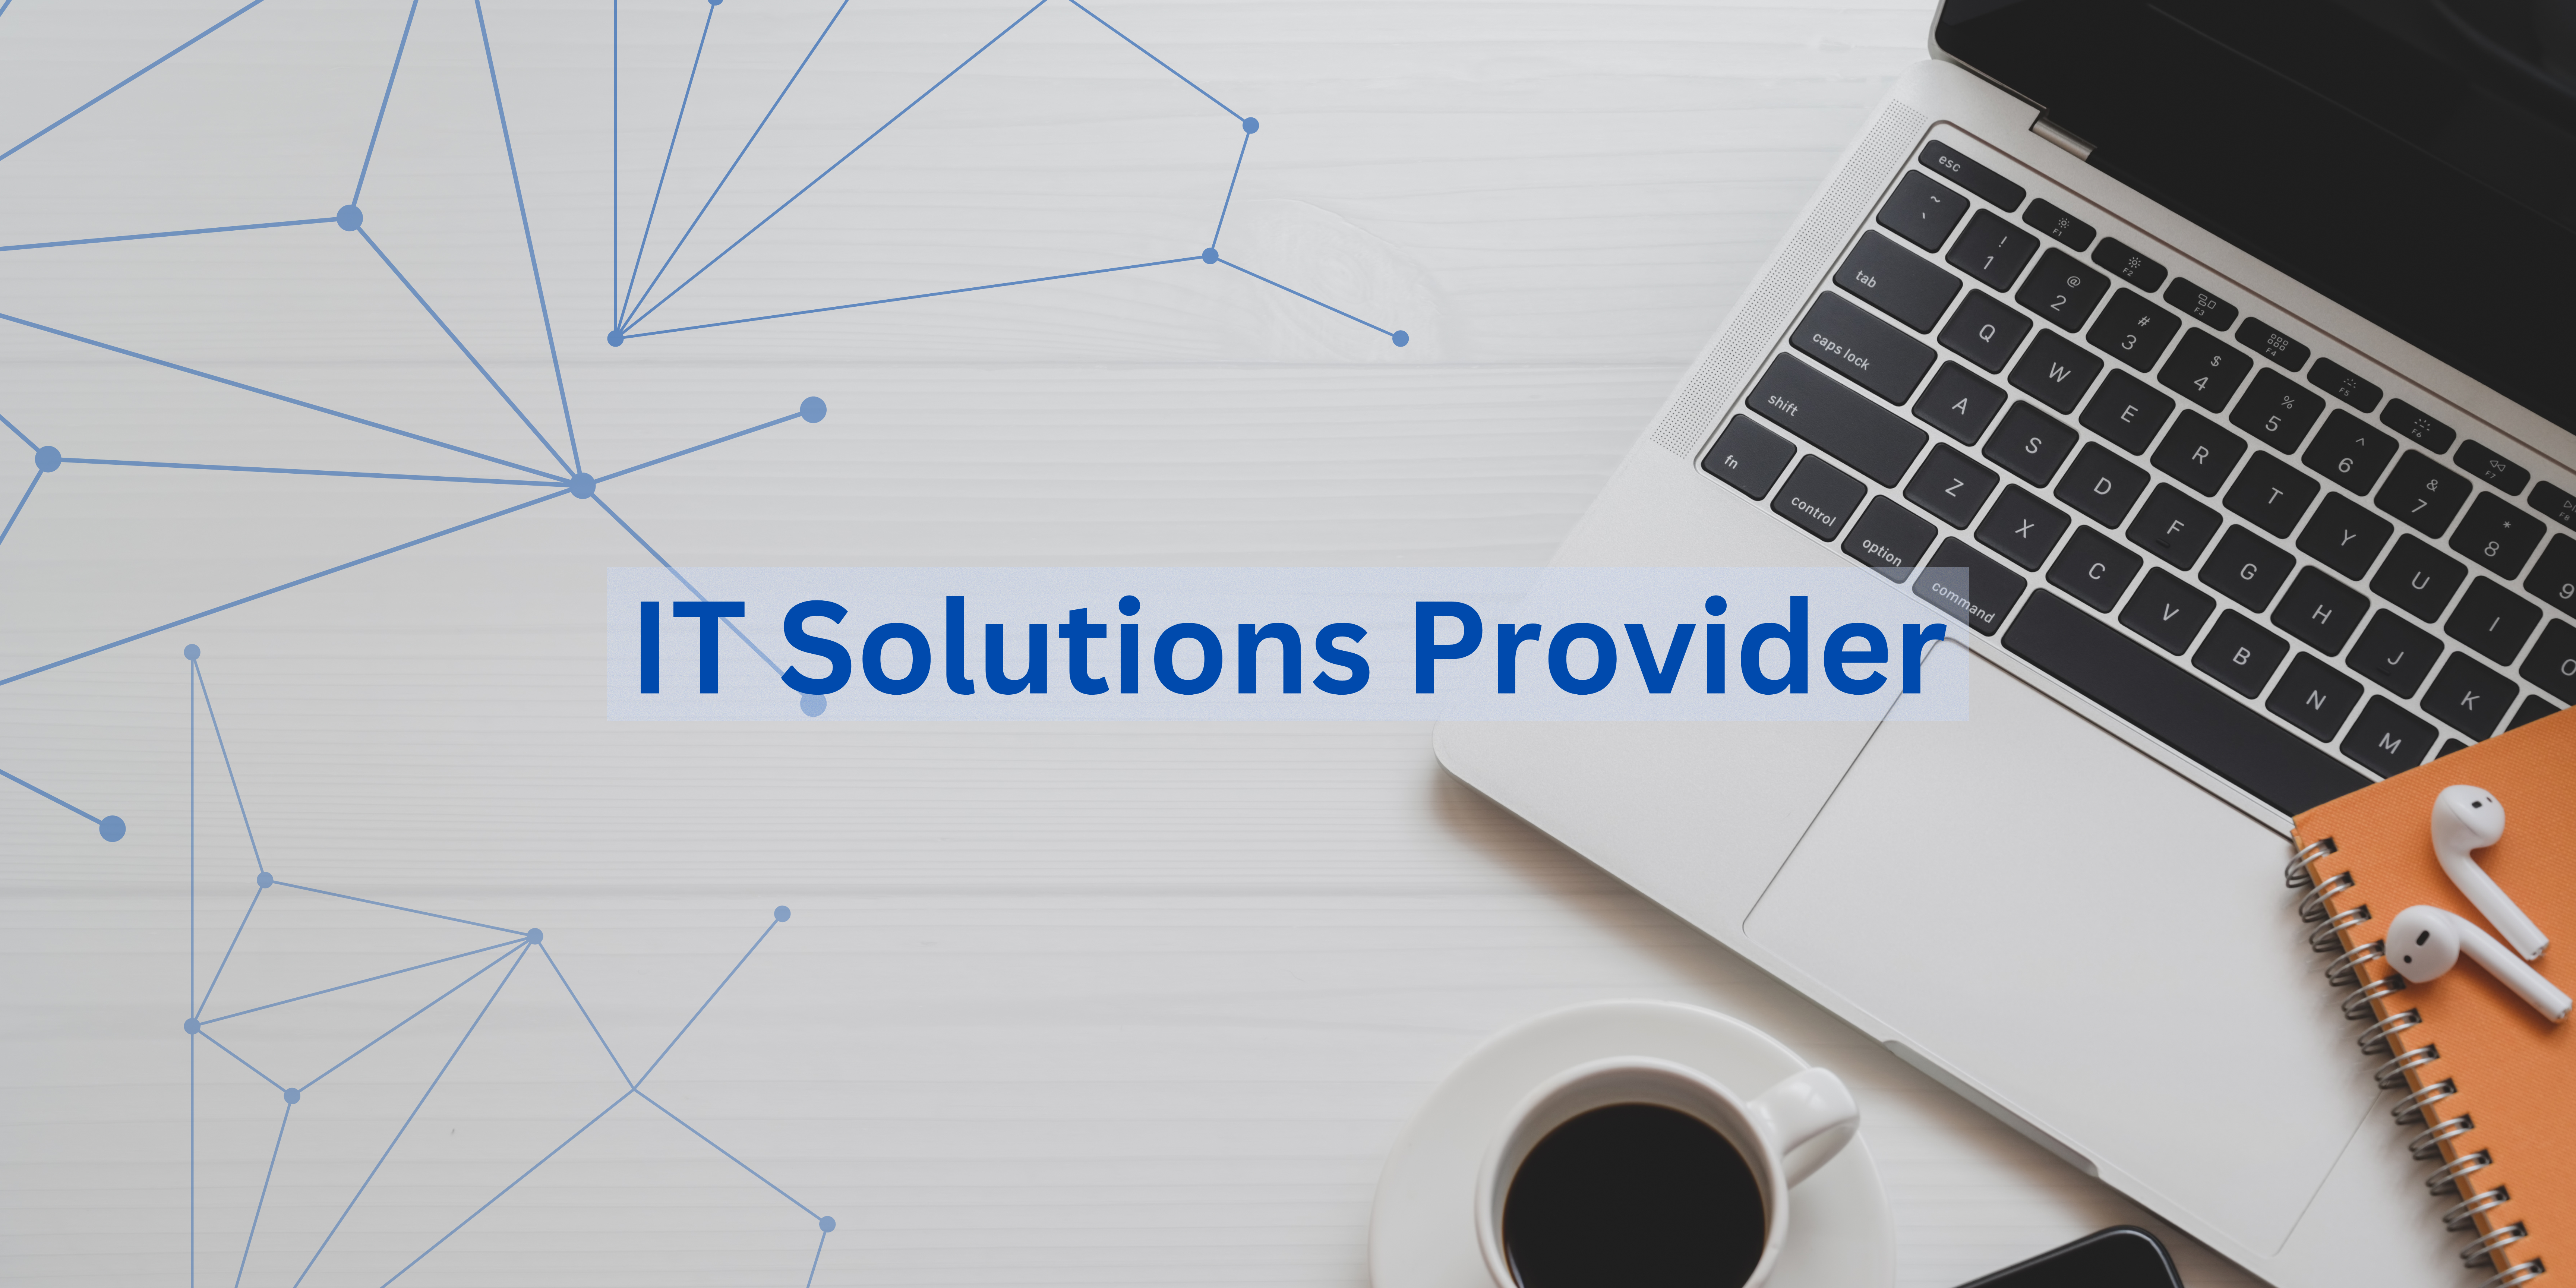 IT solutions provider